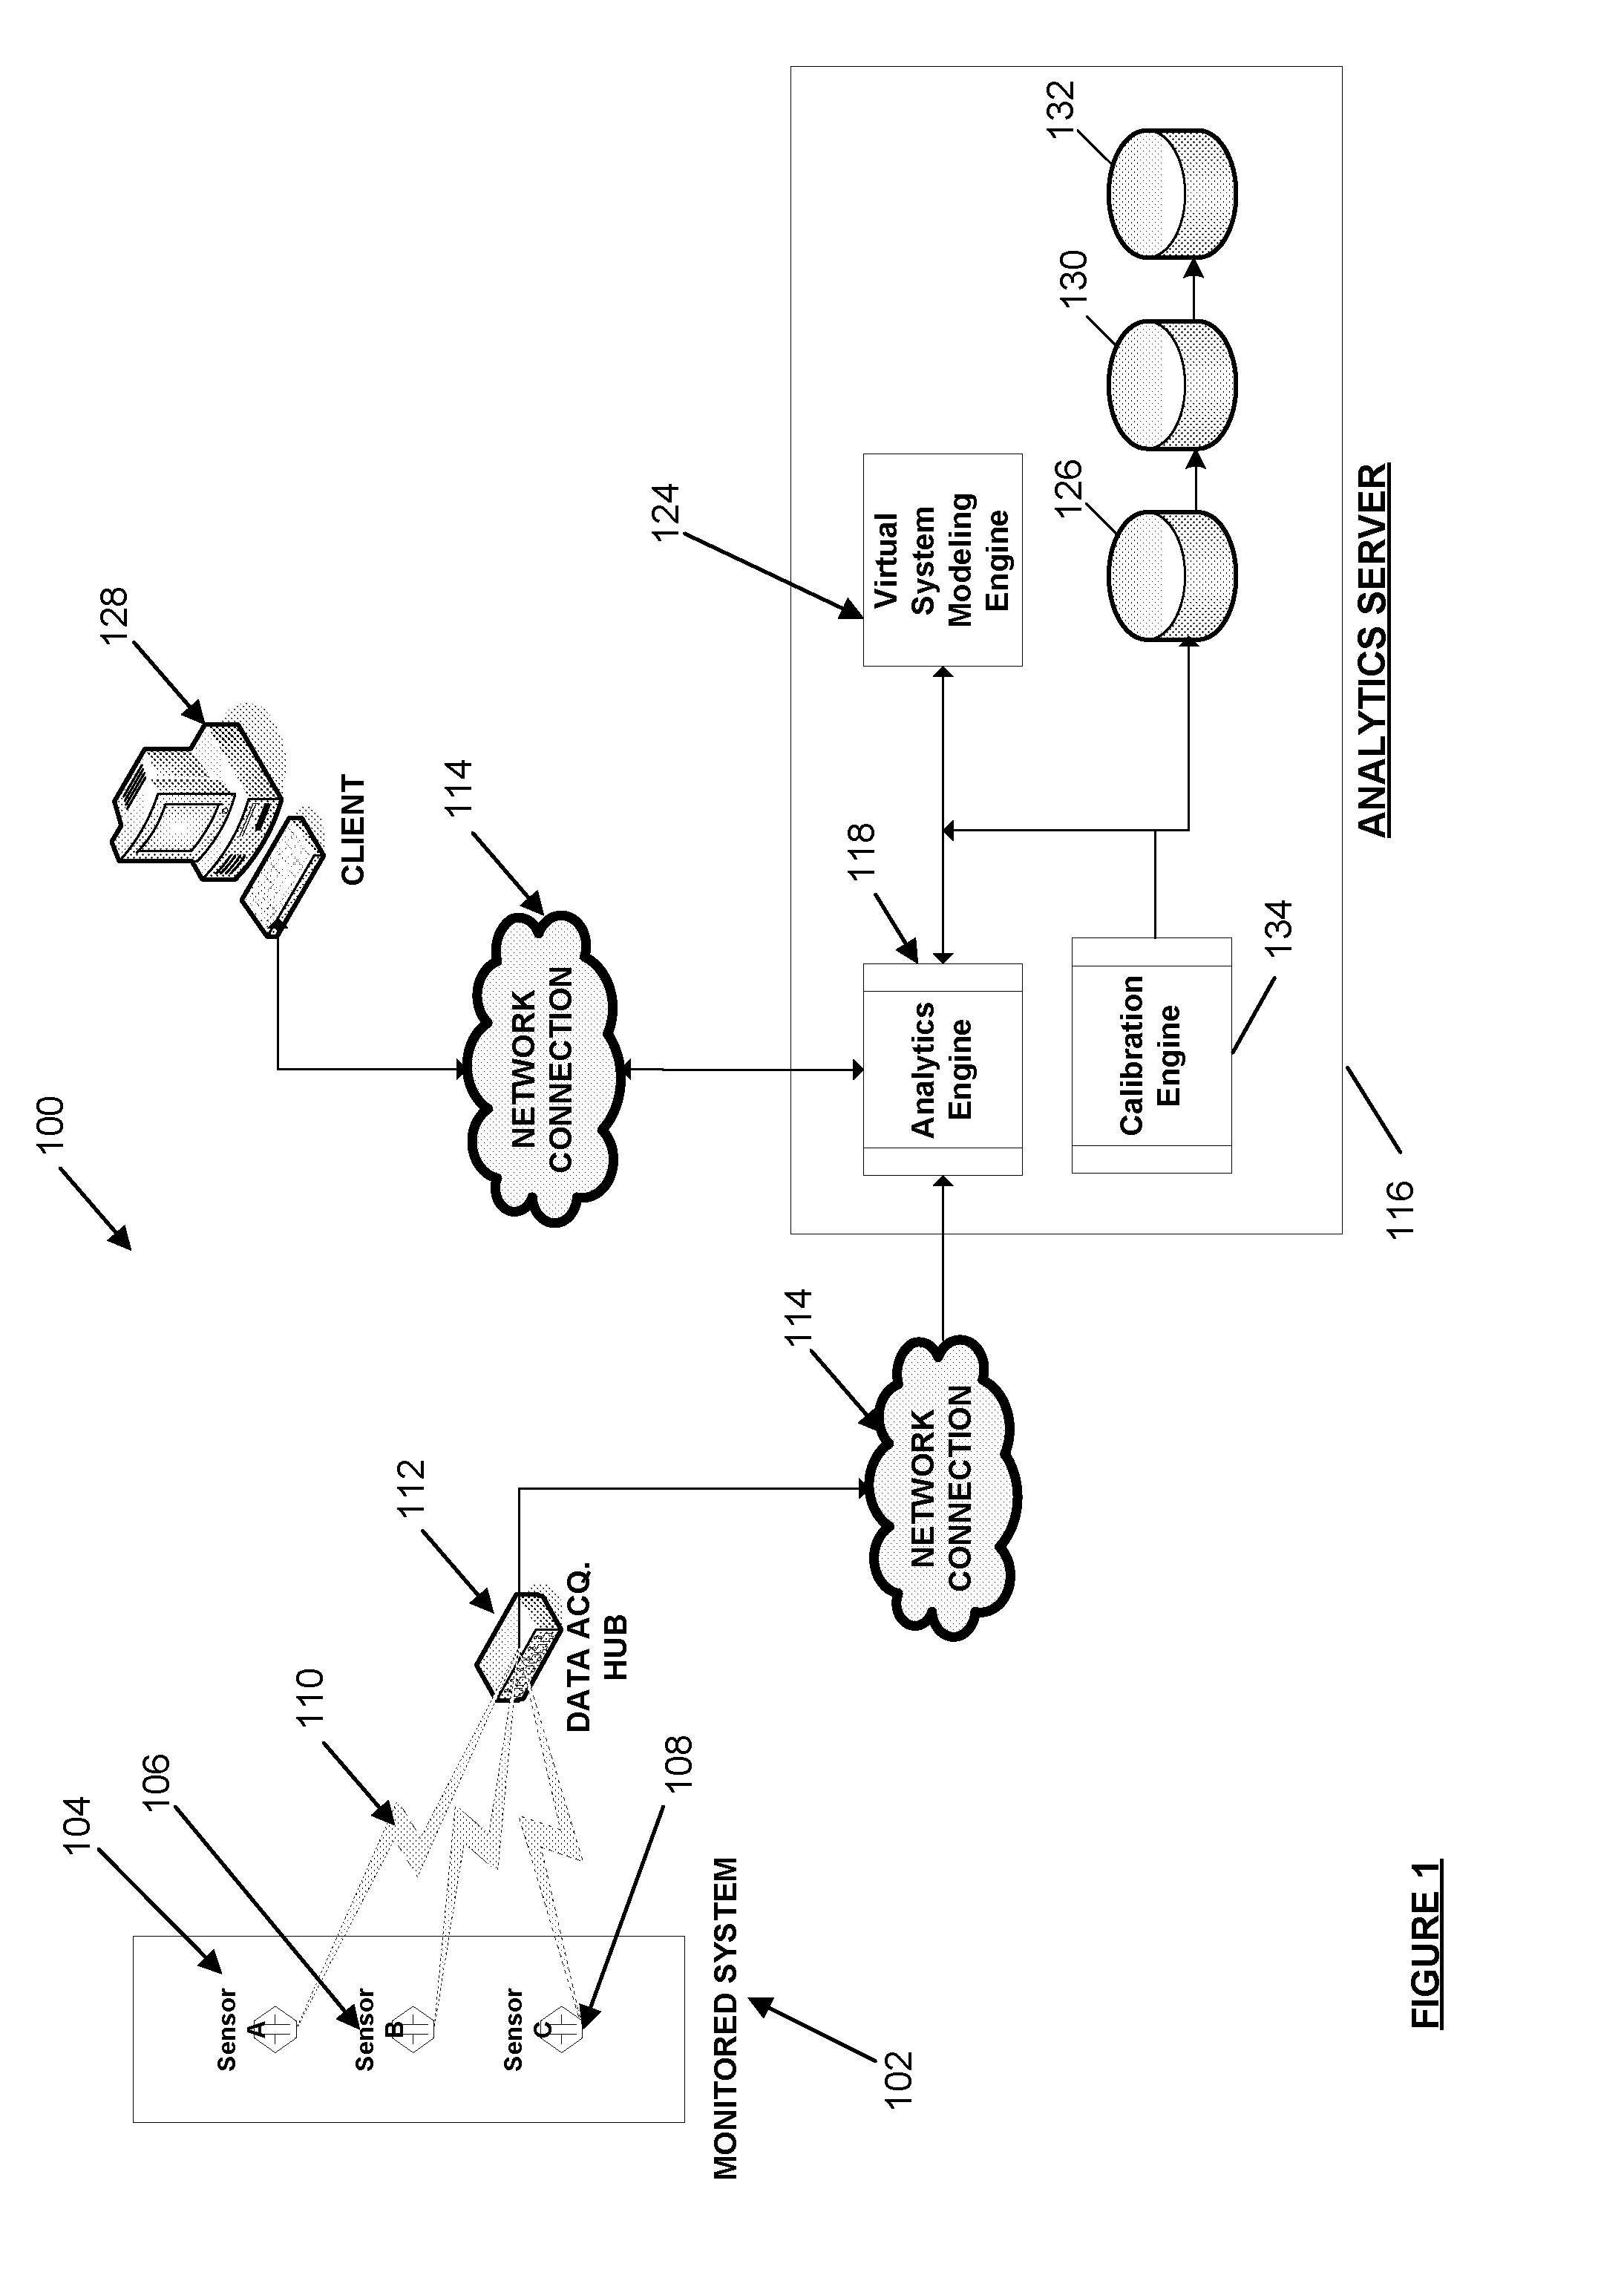 Systems and methods for a real-time synchronized electrical power system simulator for "what-if" analysis and prediction over electrical power networks